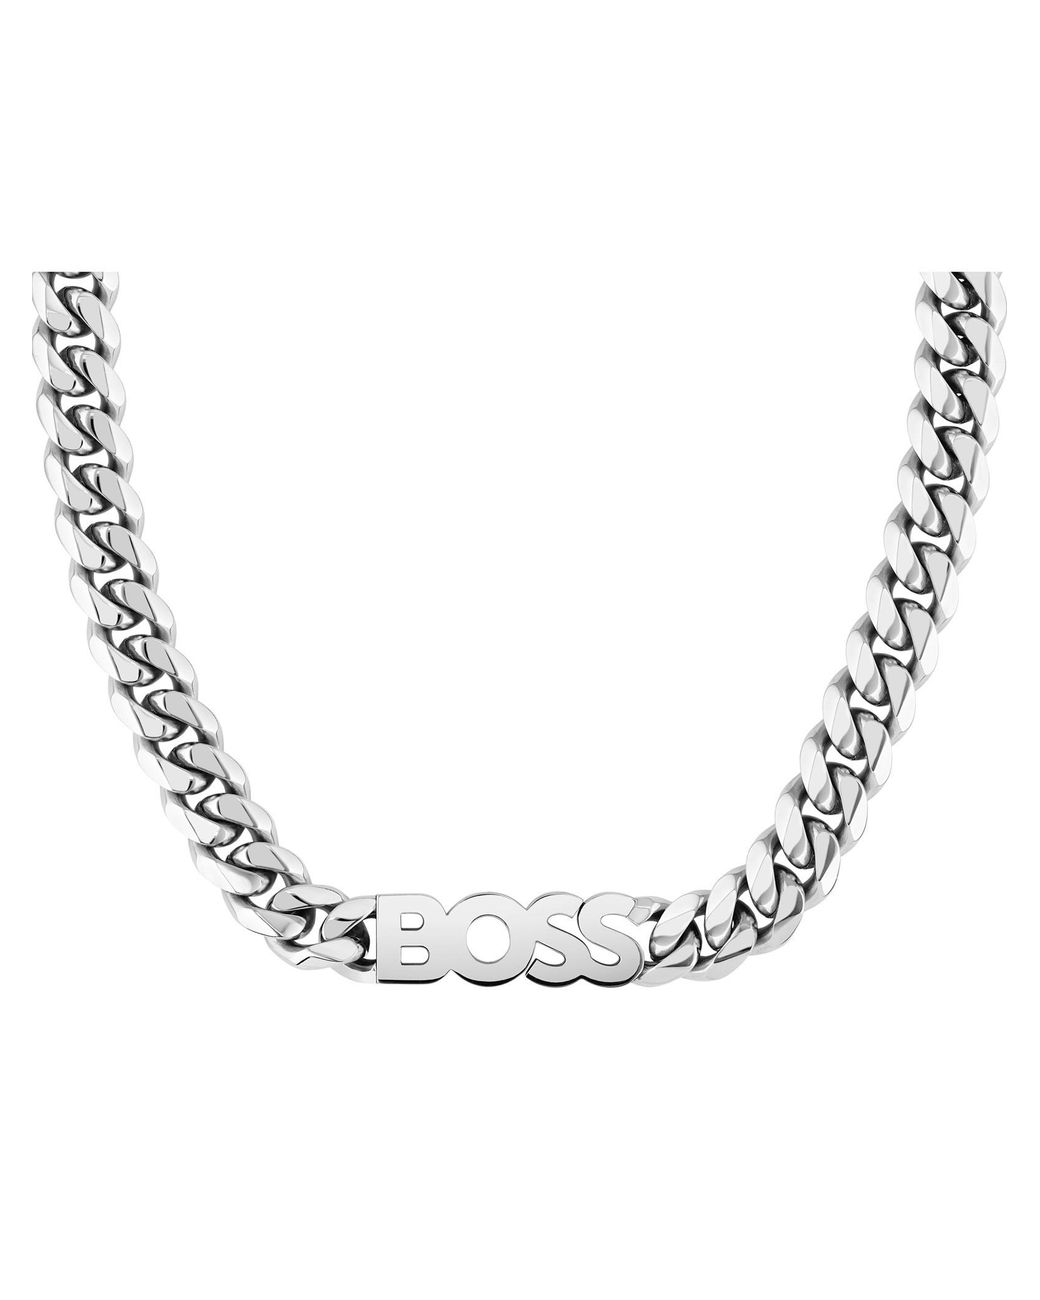 BOSS Jewelry Men's CHAIN FOR HIM Collection Chain Bracelet Yellow gold -  1580403M : Amazon.co.uk: Fashion